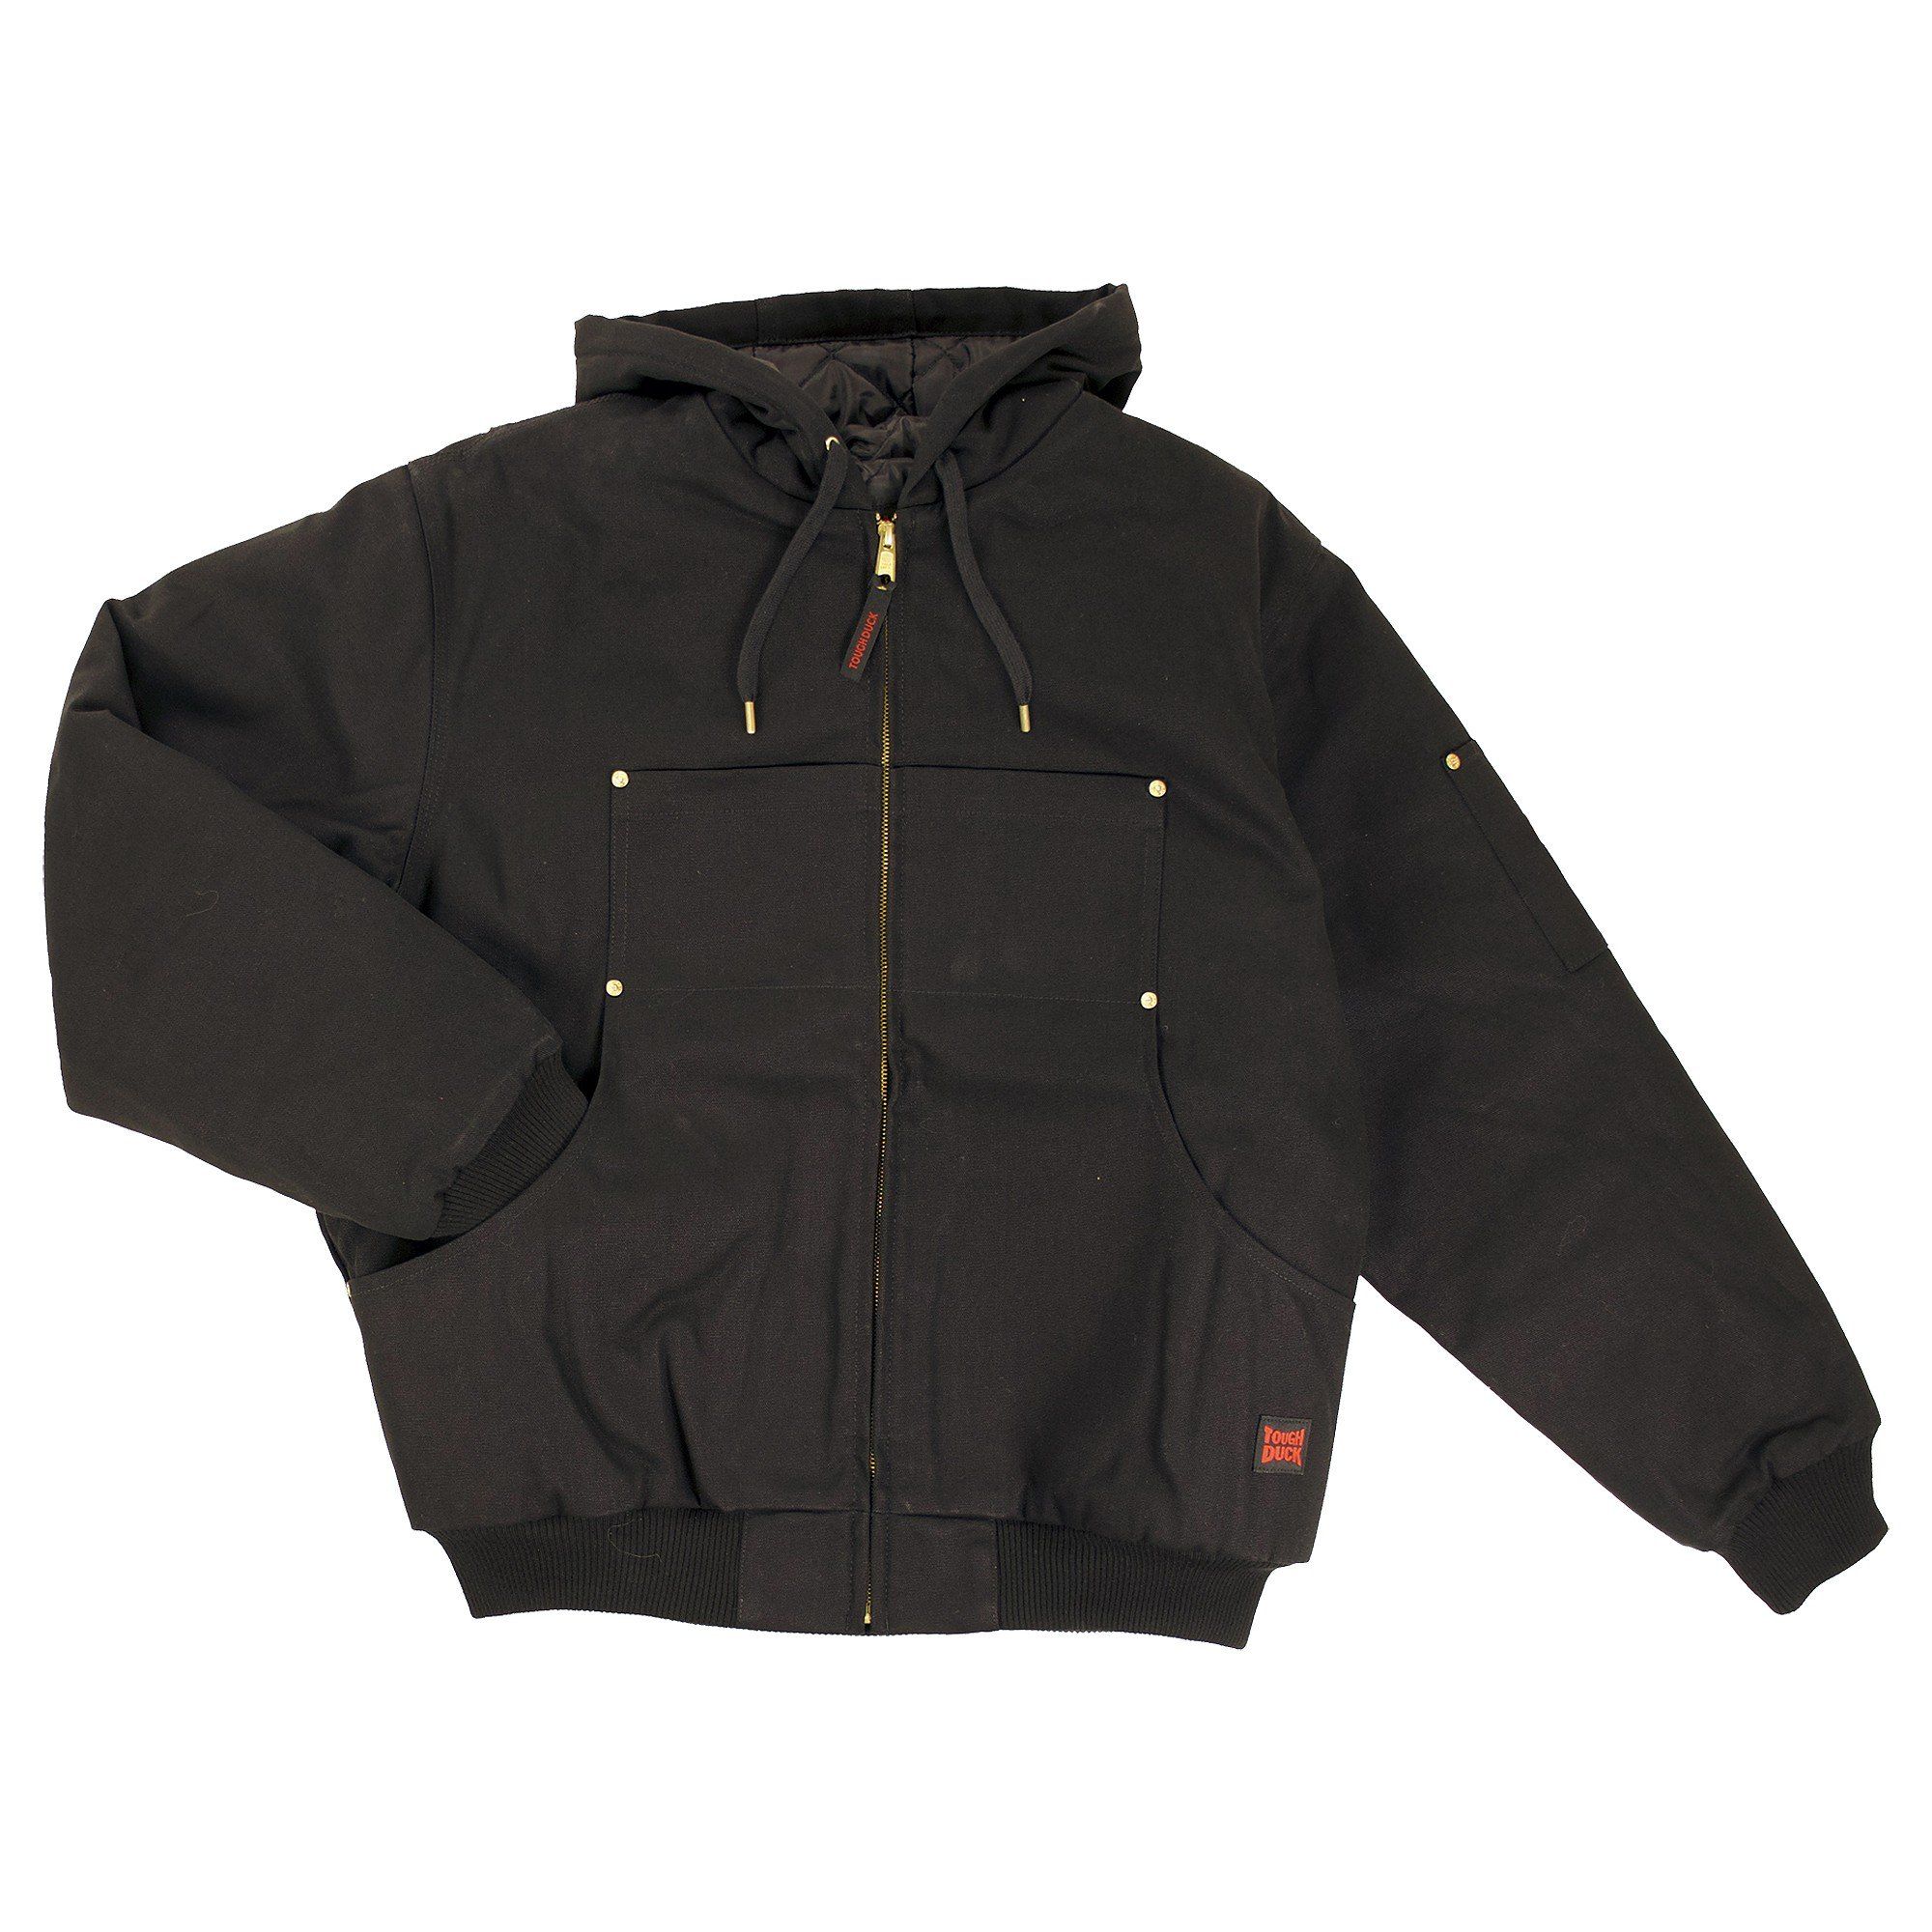 UNCOMMON REIGN - GET COZY SHERPA JACKET